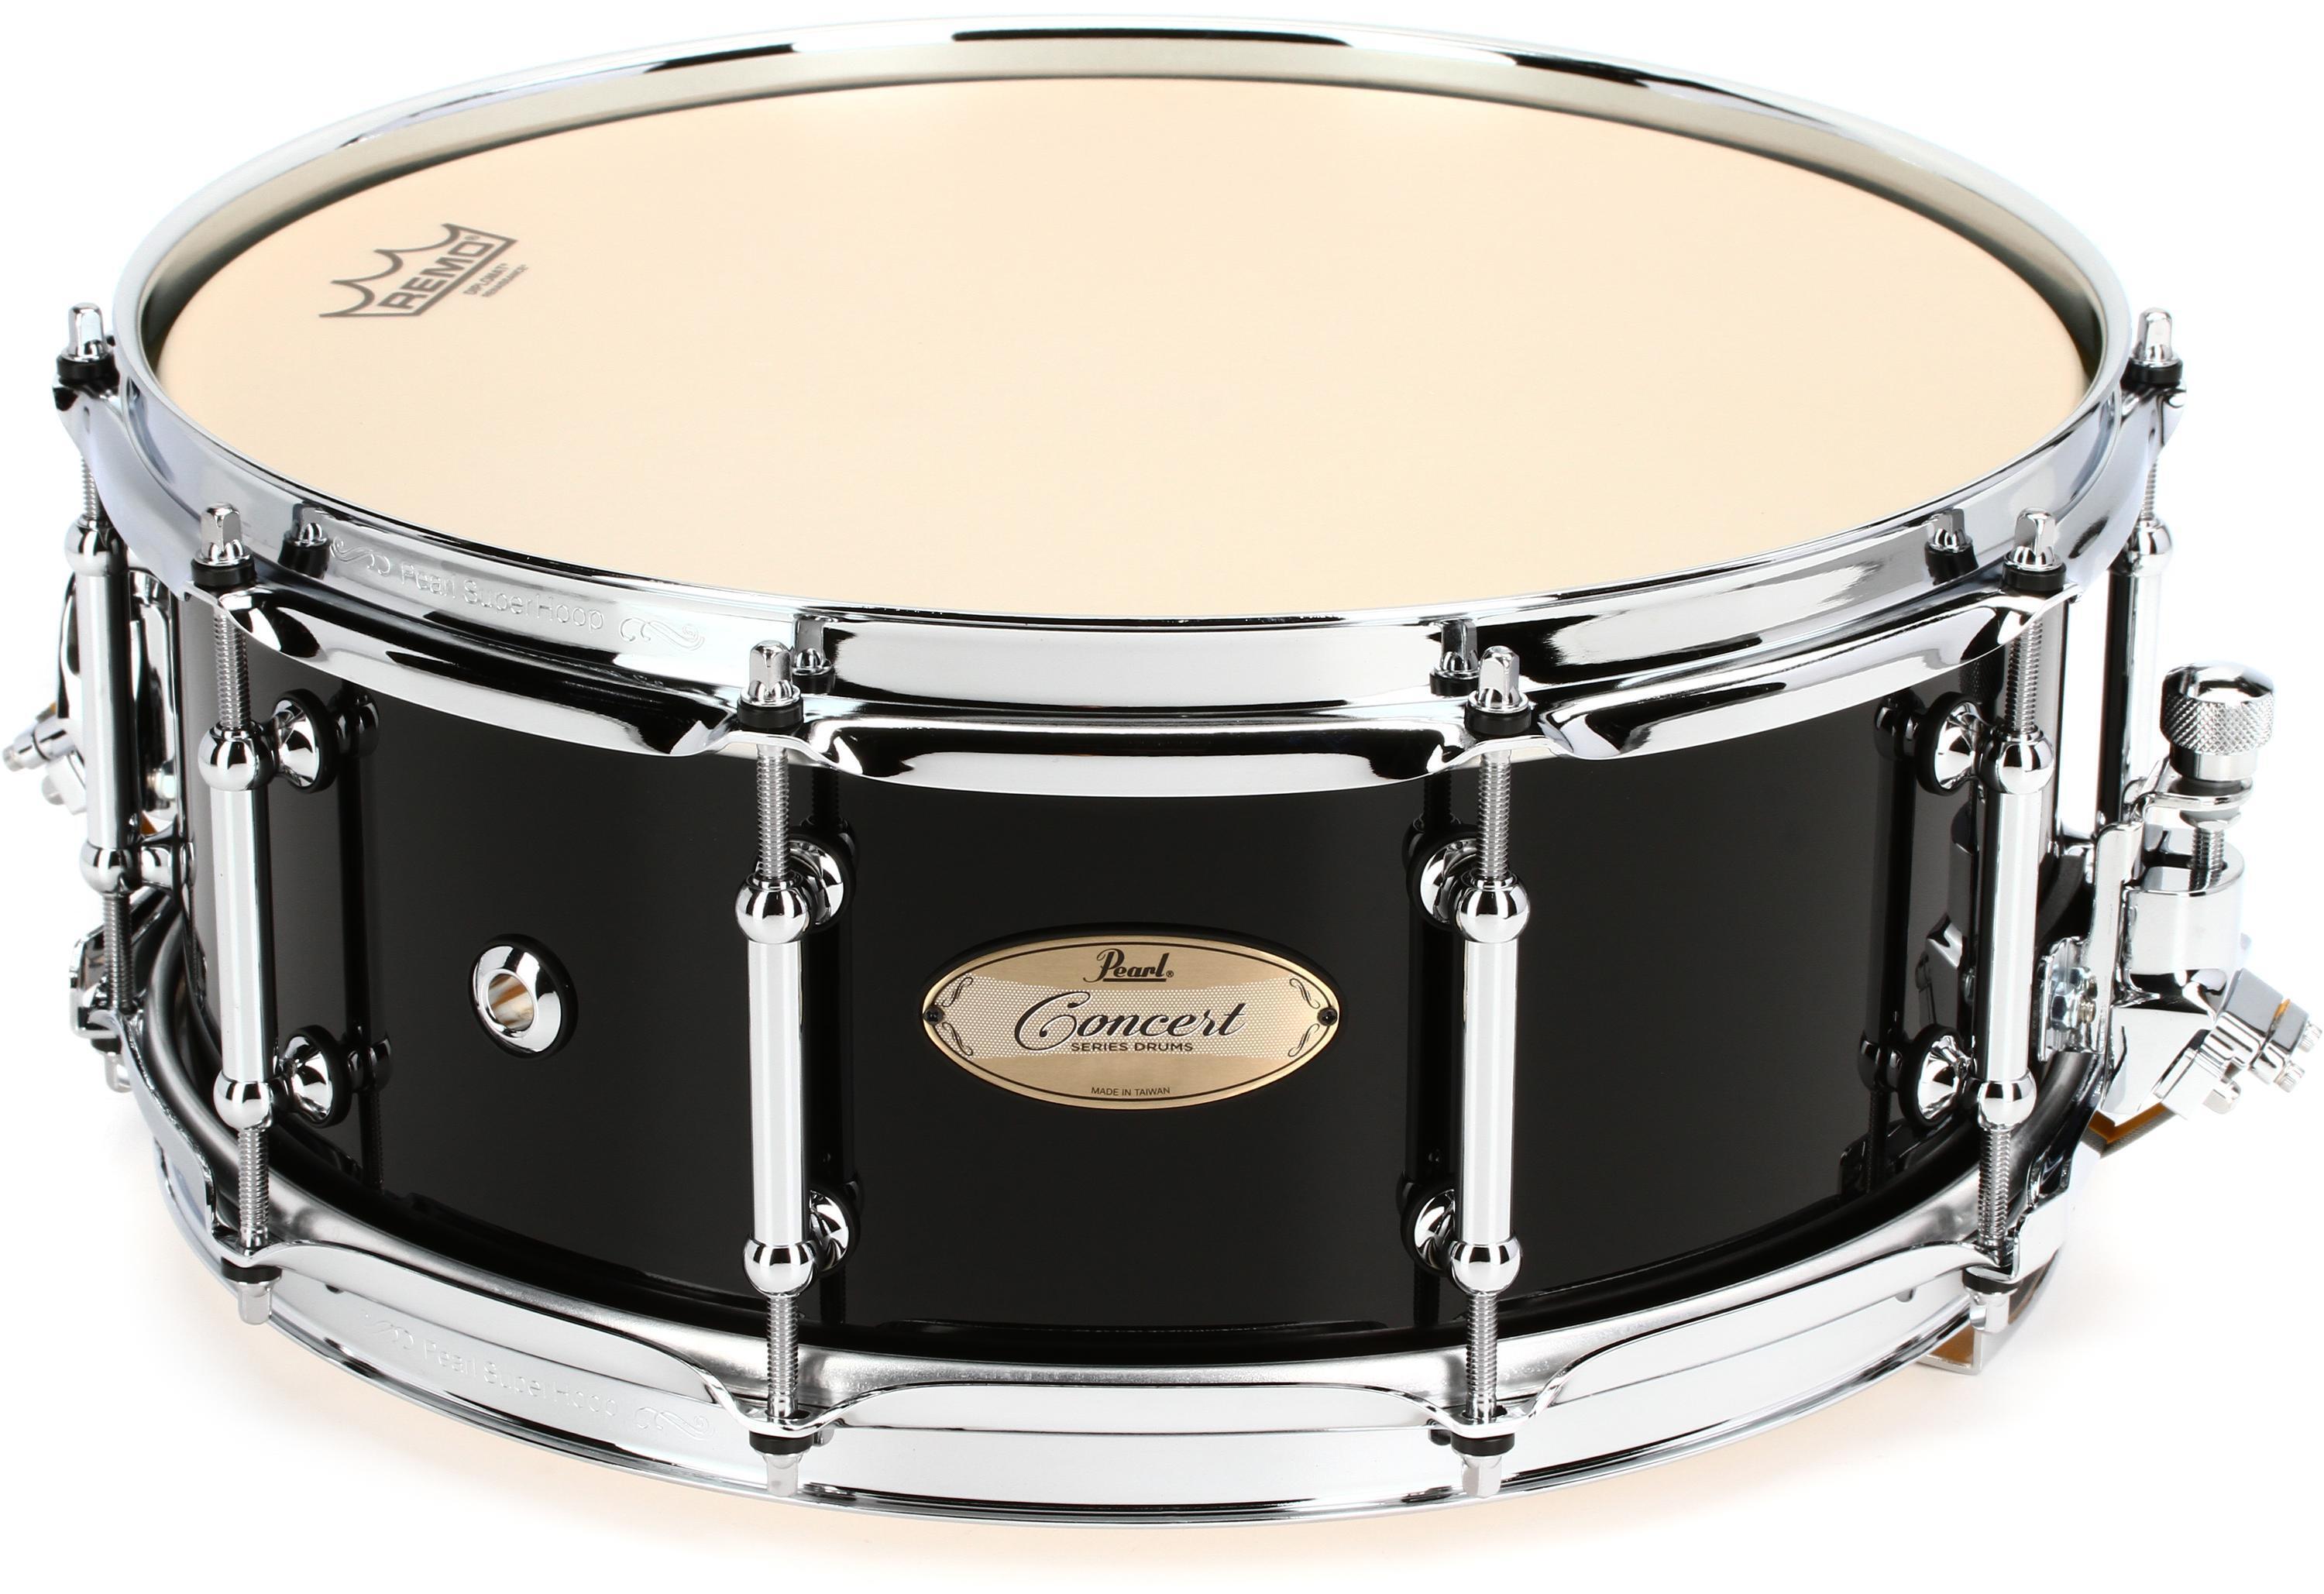 Pearl Concert Snare Drum - 5.5-inch x 14-inch - Piano Black